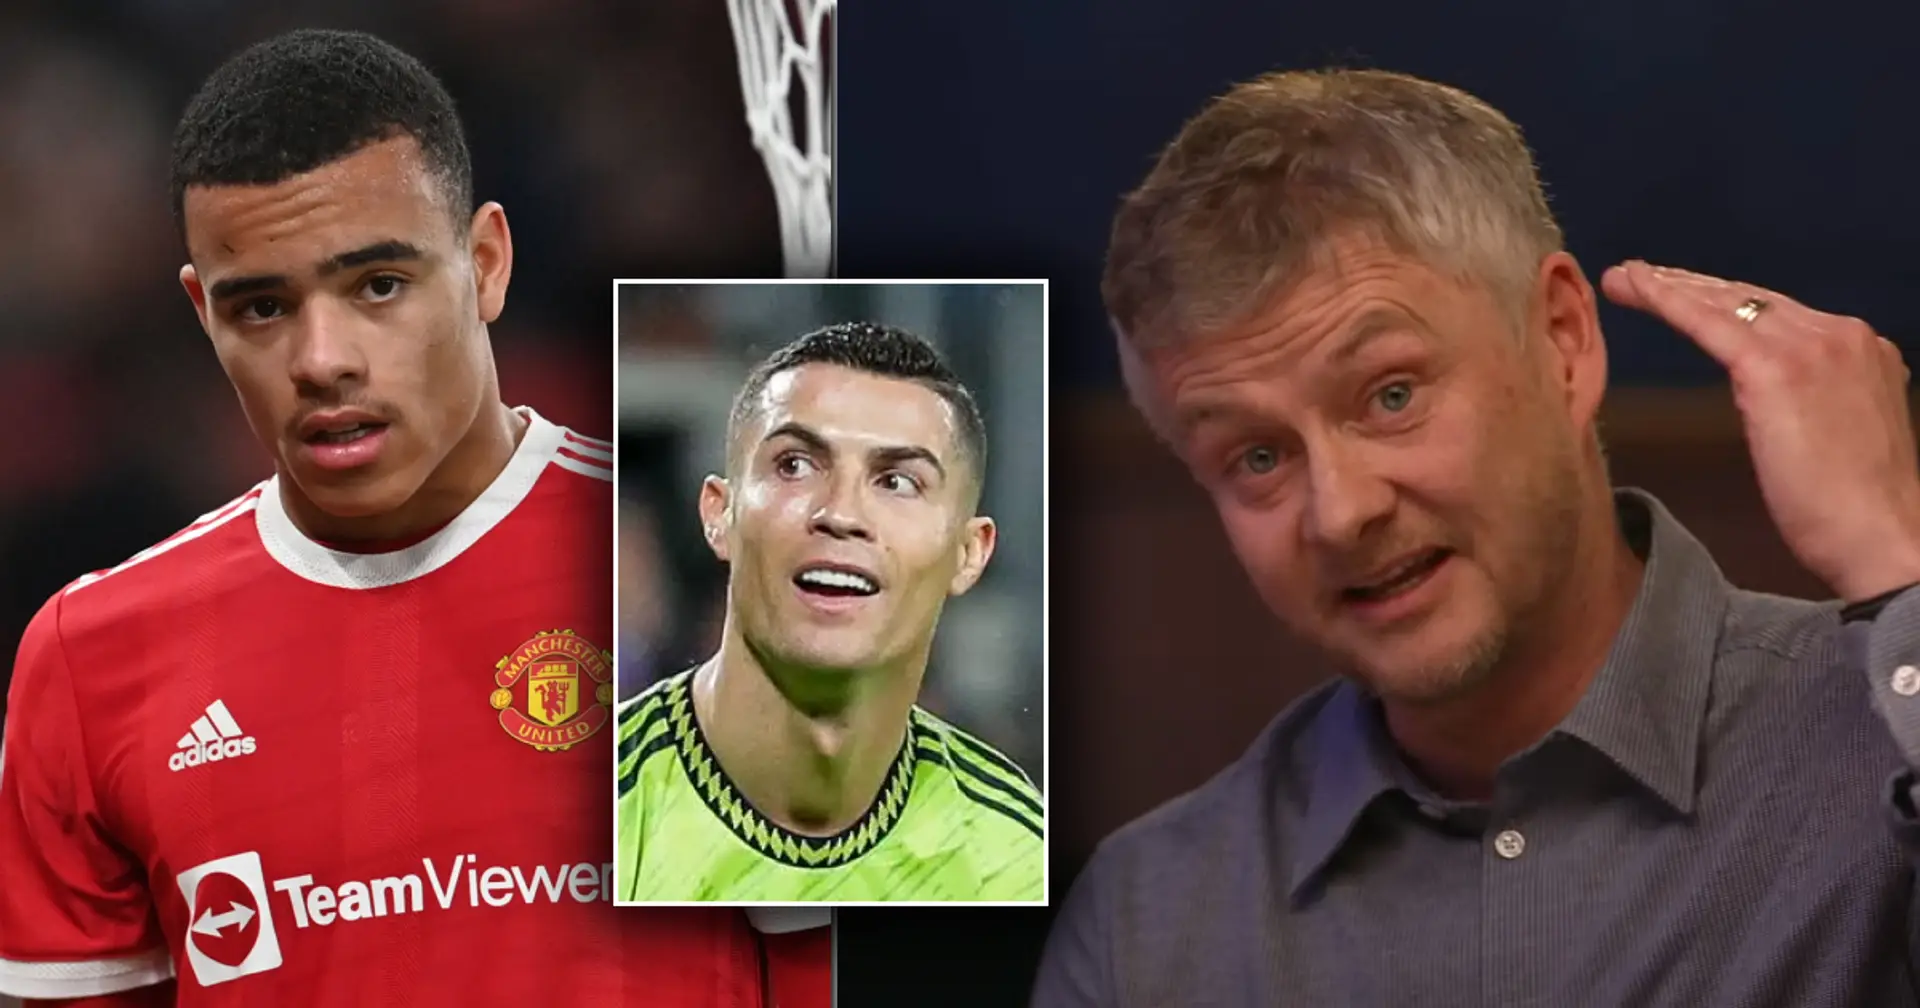 'Greenwood and Rashford could learn from him': Solskjaer justifies Cristiano Ronaldo signing for Man United